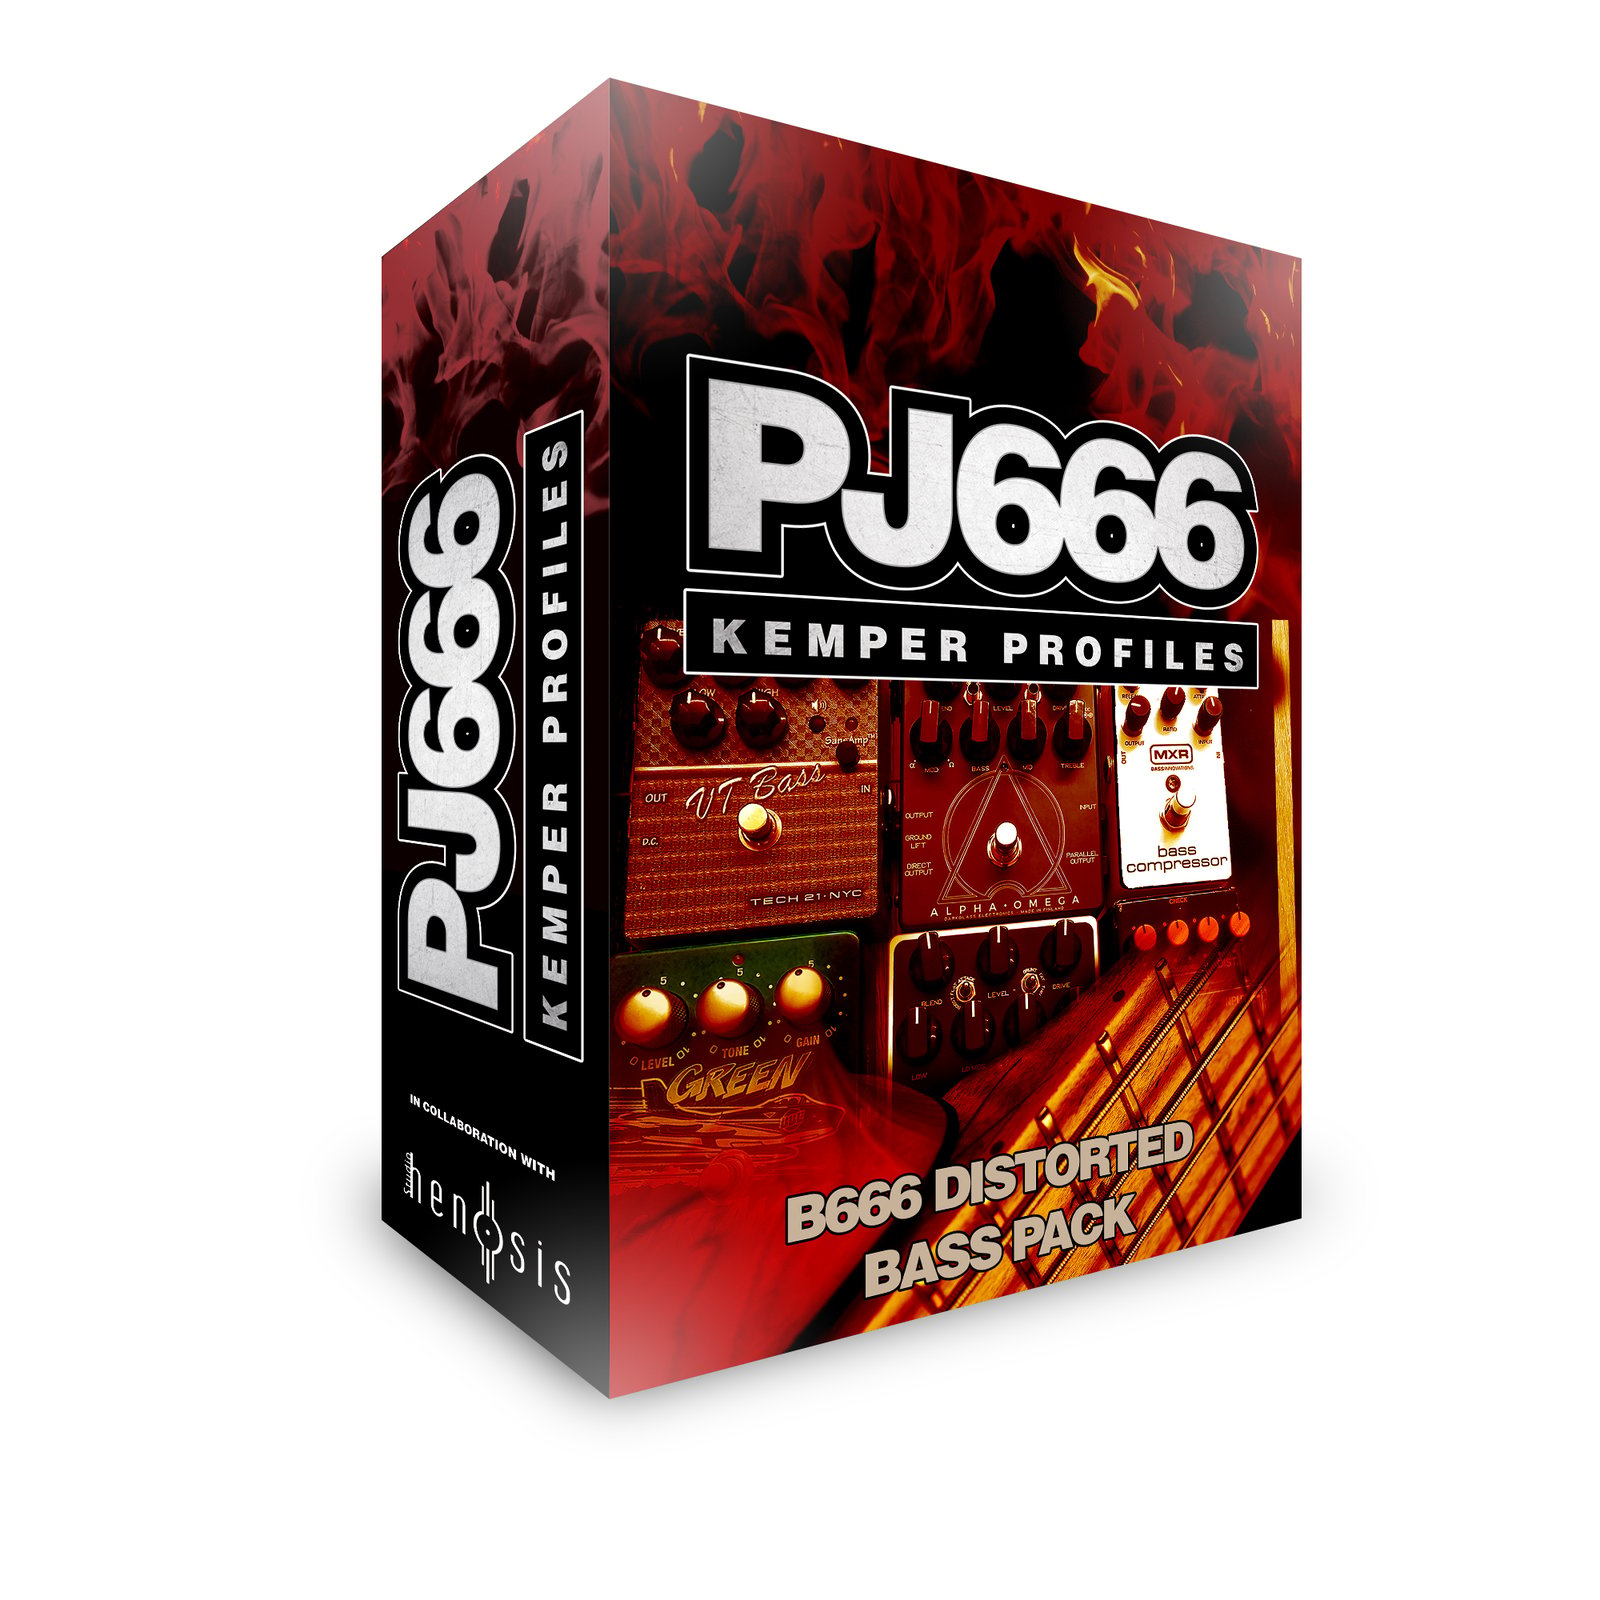 B666 DISTORTED BASS PACK